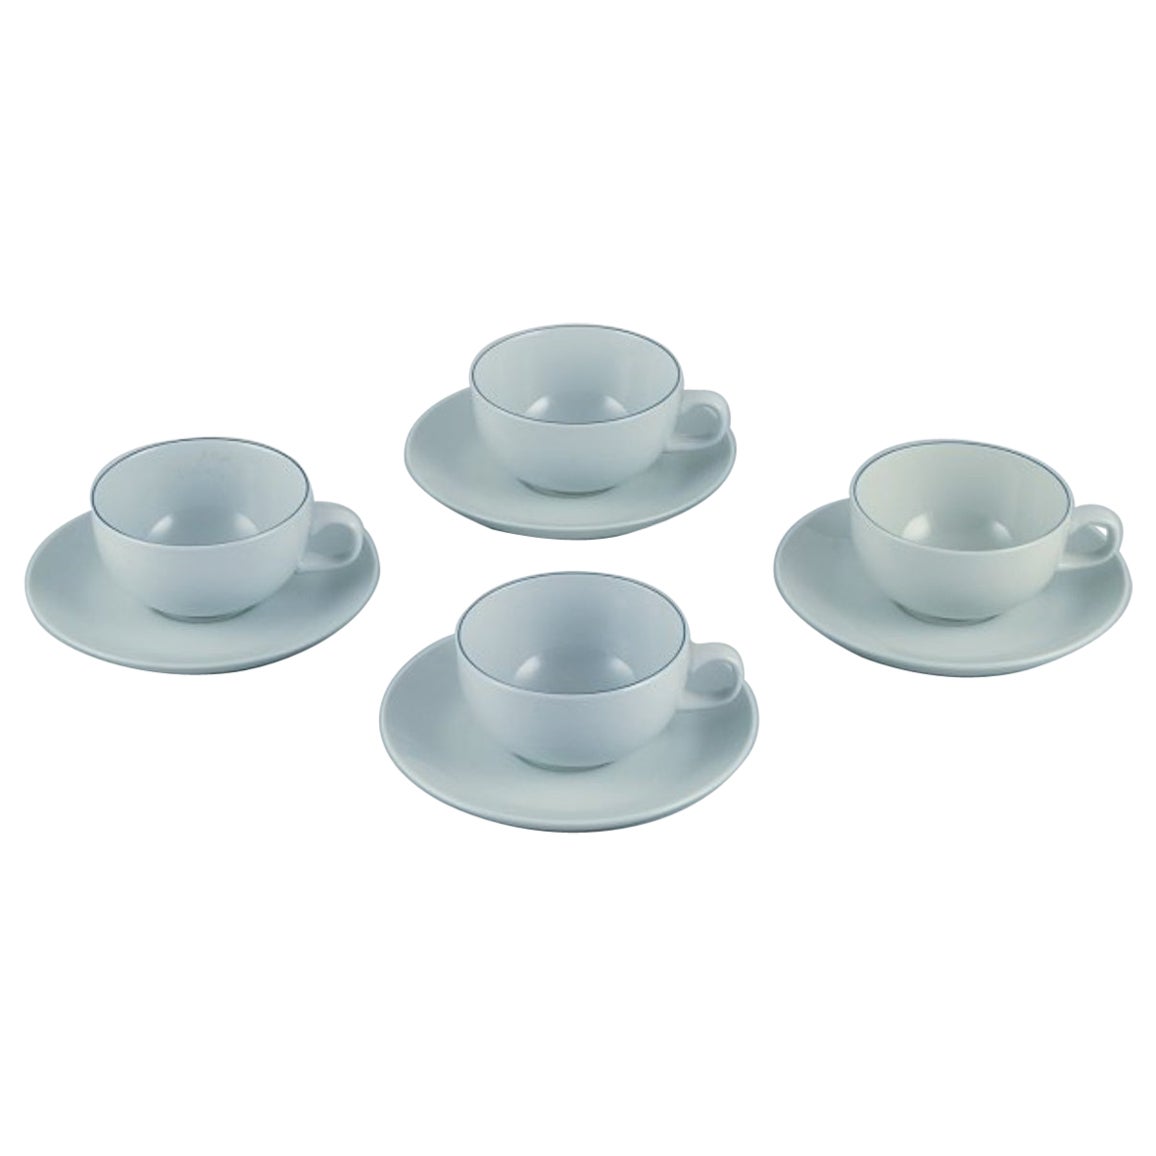 Grethe Meyer for Aluminia. Set of four Blue line coffee cups with saucers.